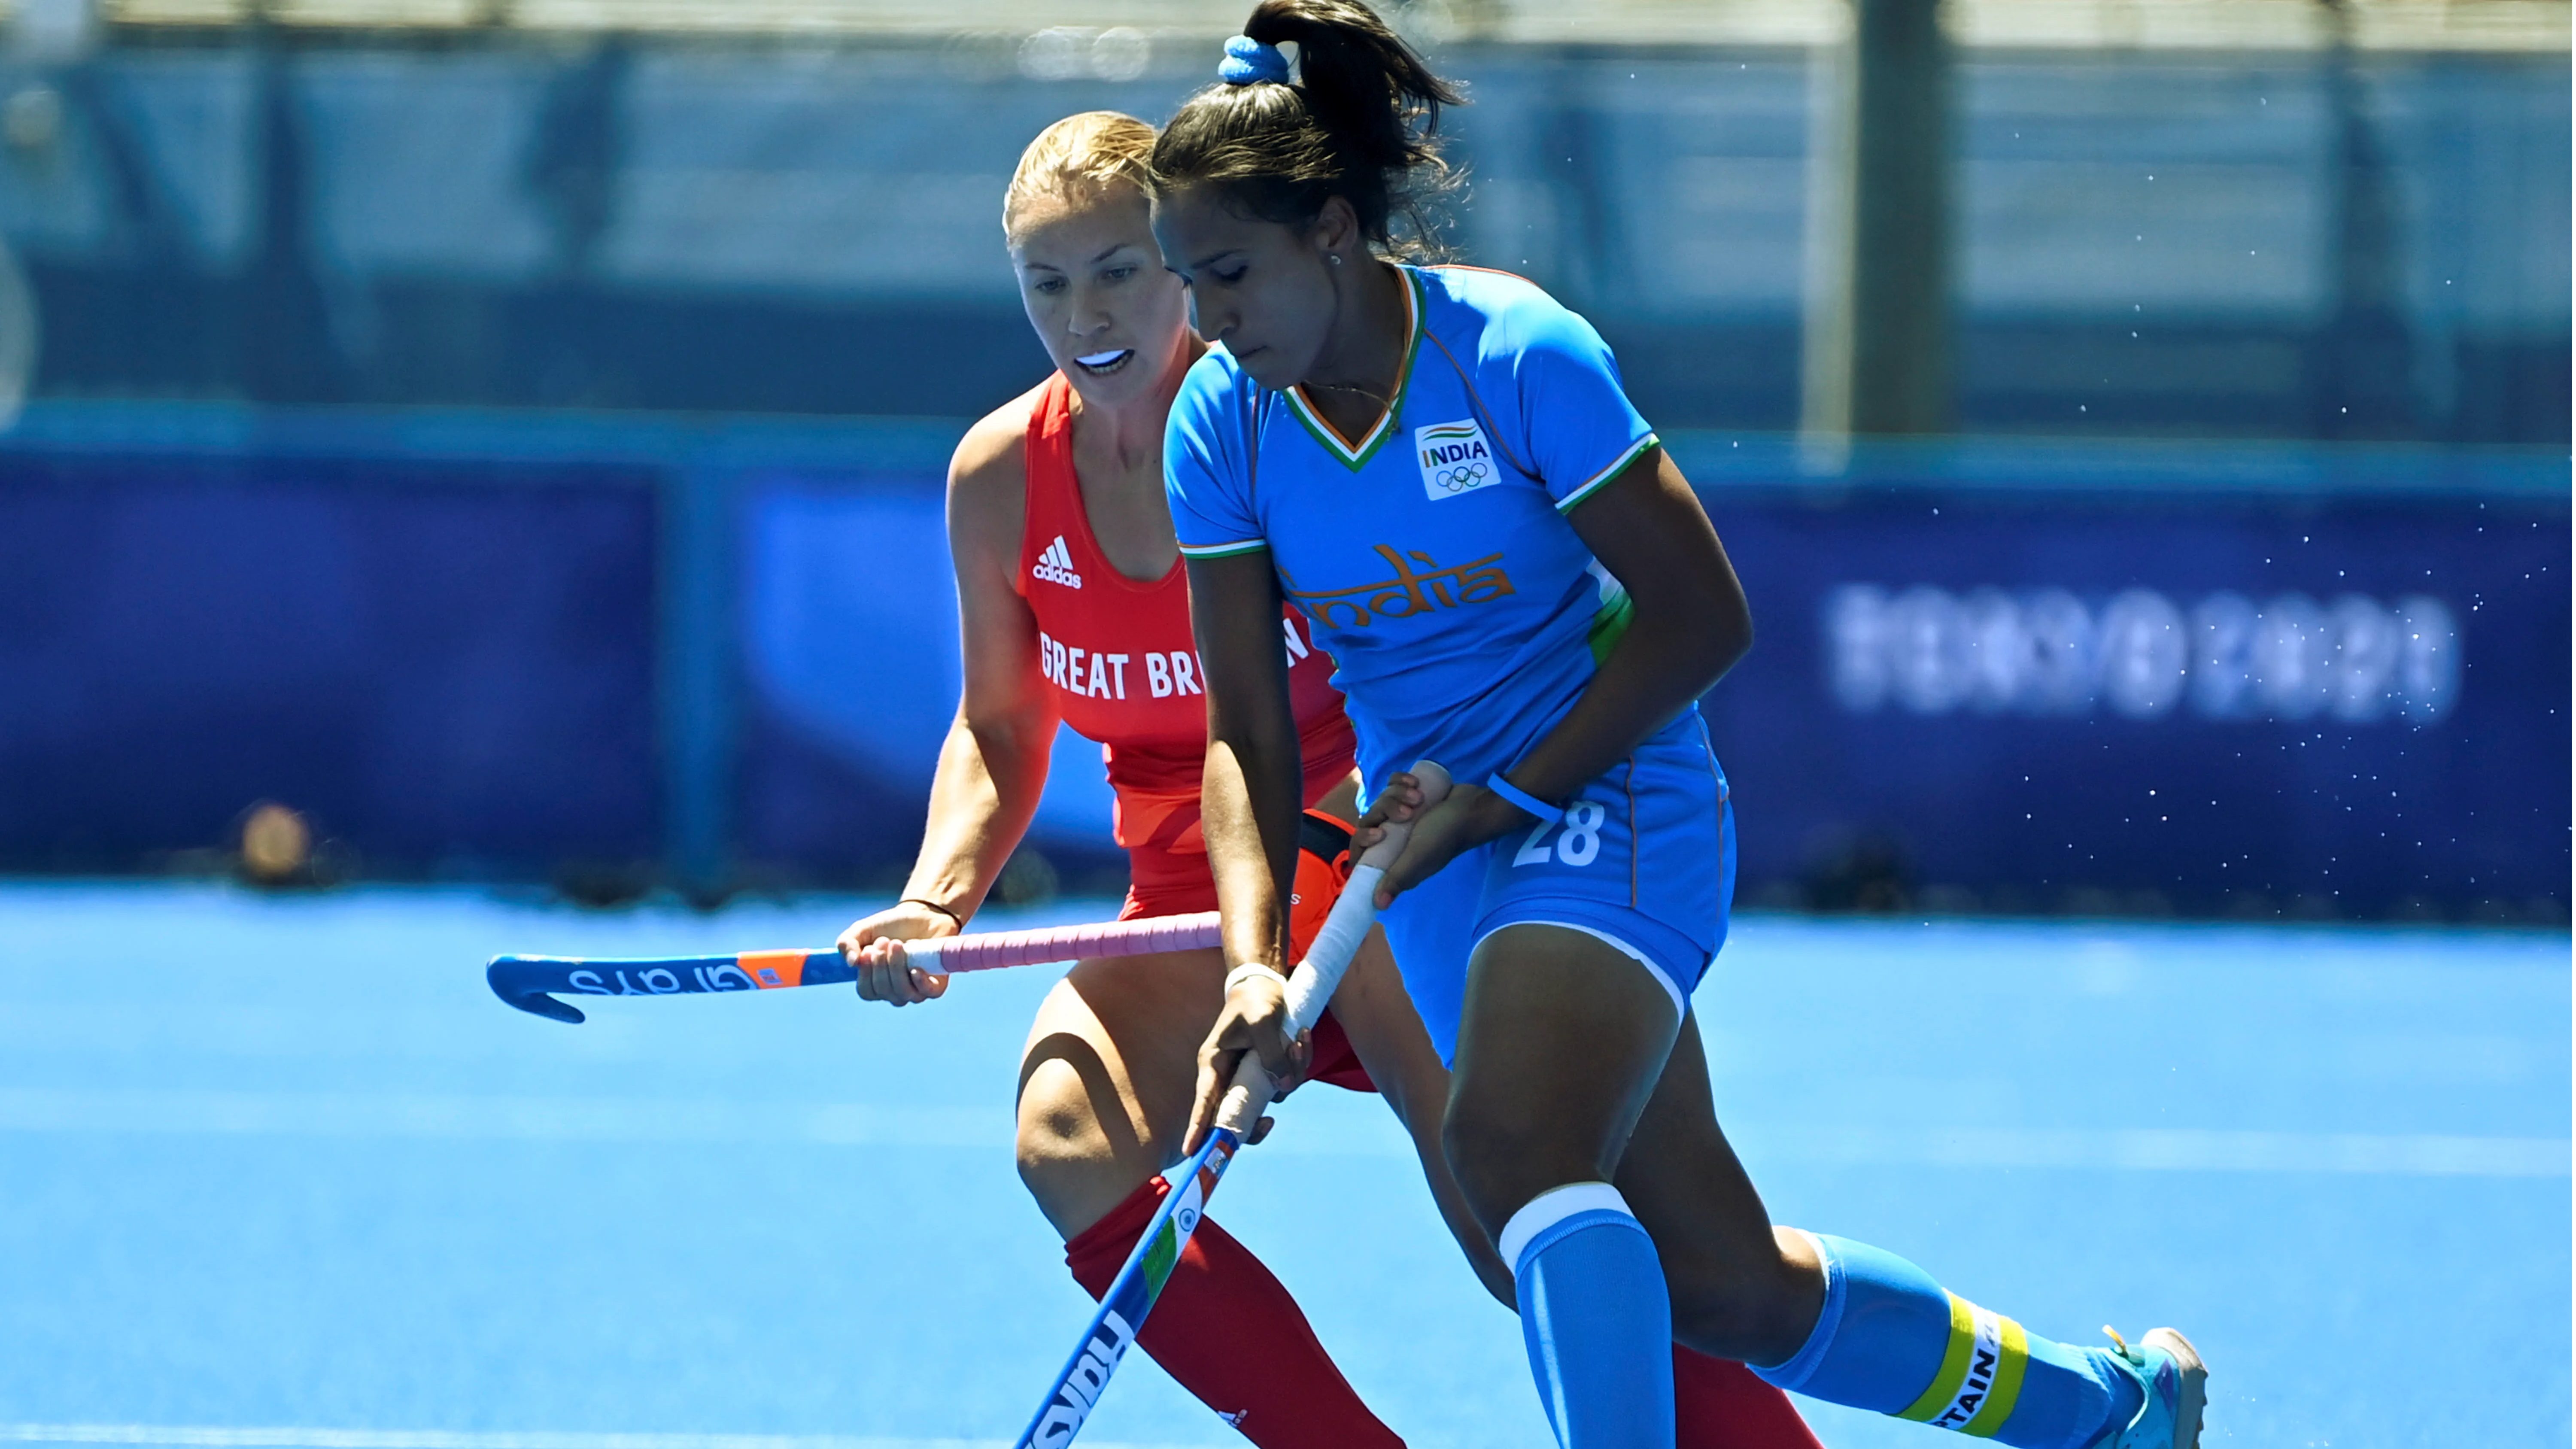 India lose 4-3 to Great Britain, miss out on Olympic women’s hockey bronze